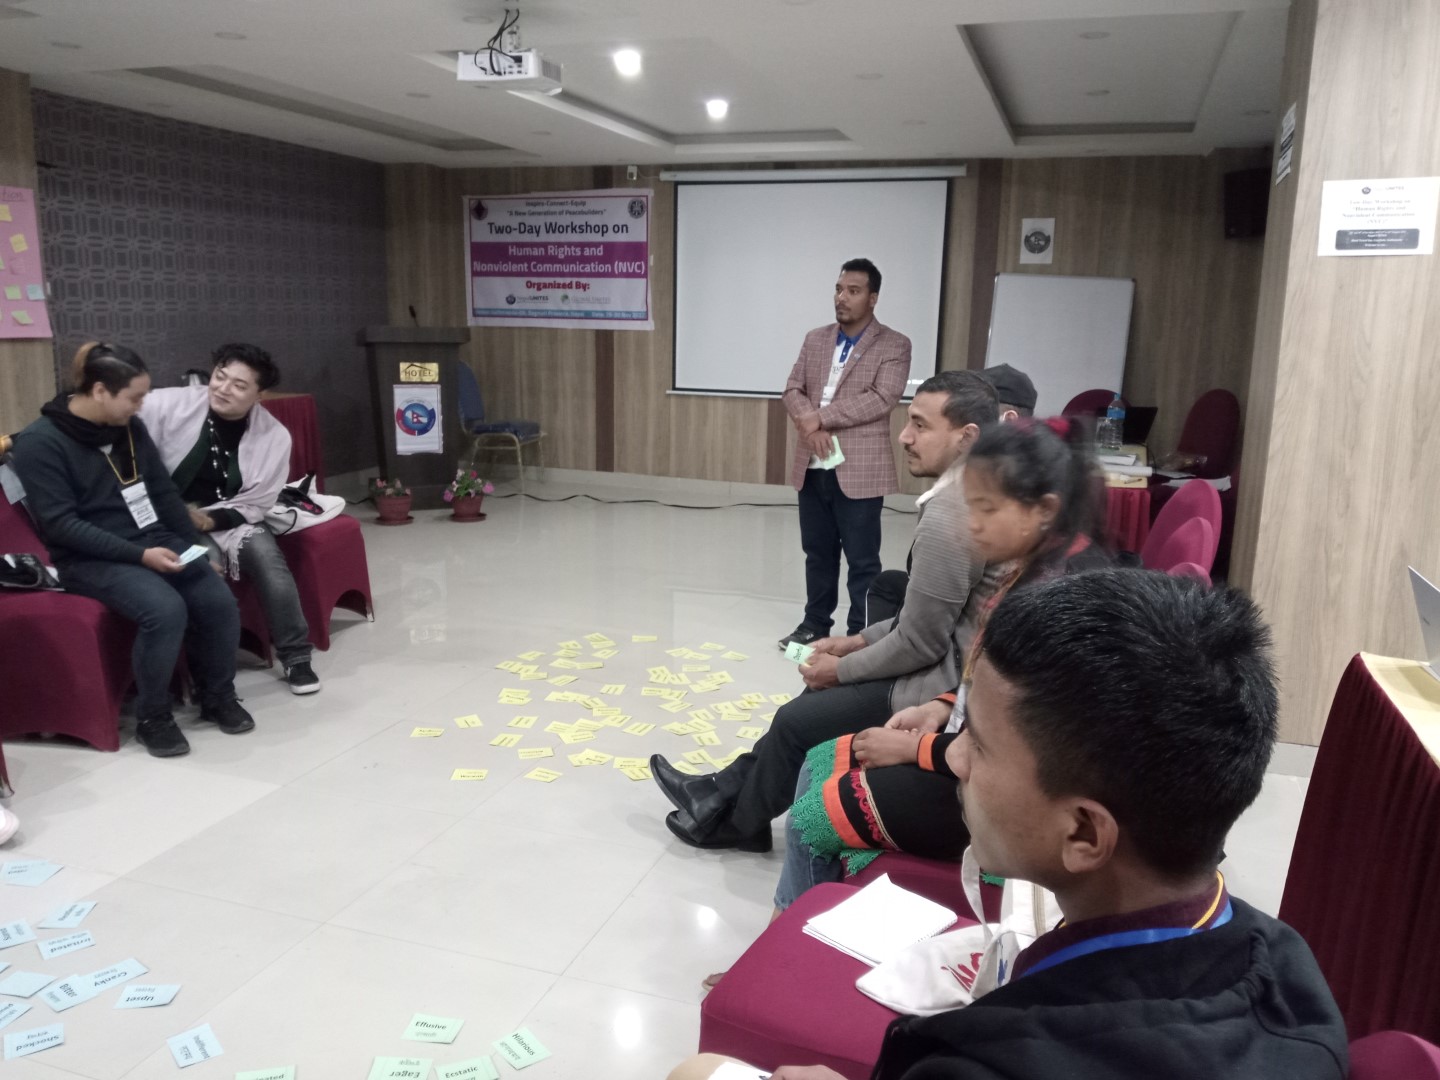 Human Rights and Nonviolent Communication (NVC) Workshop